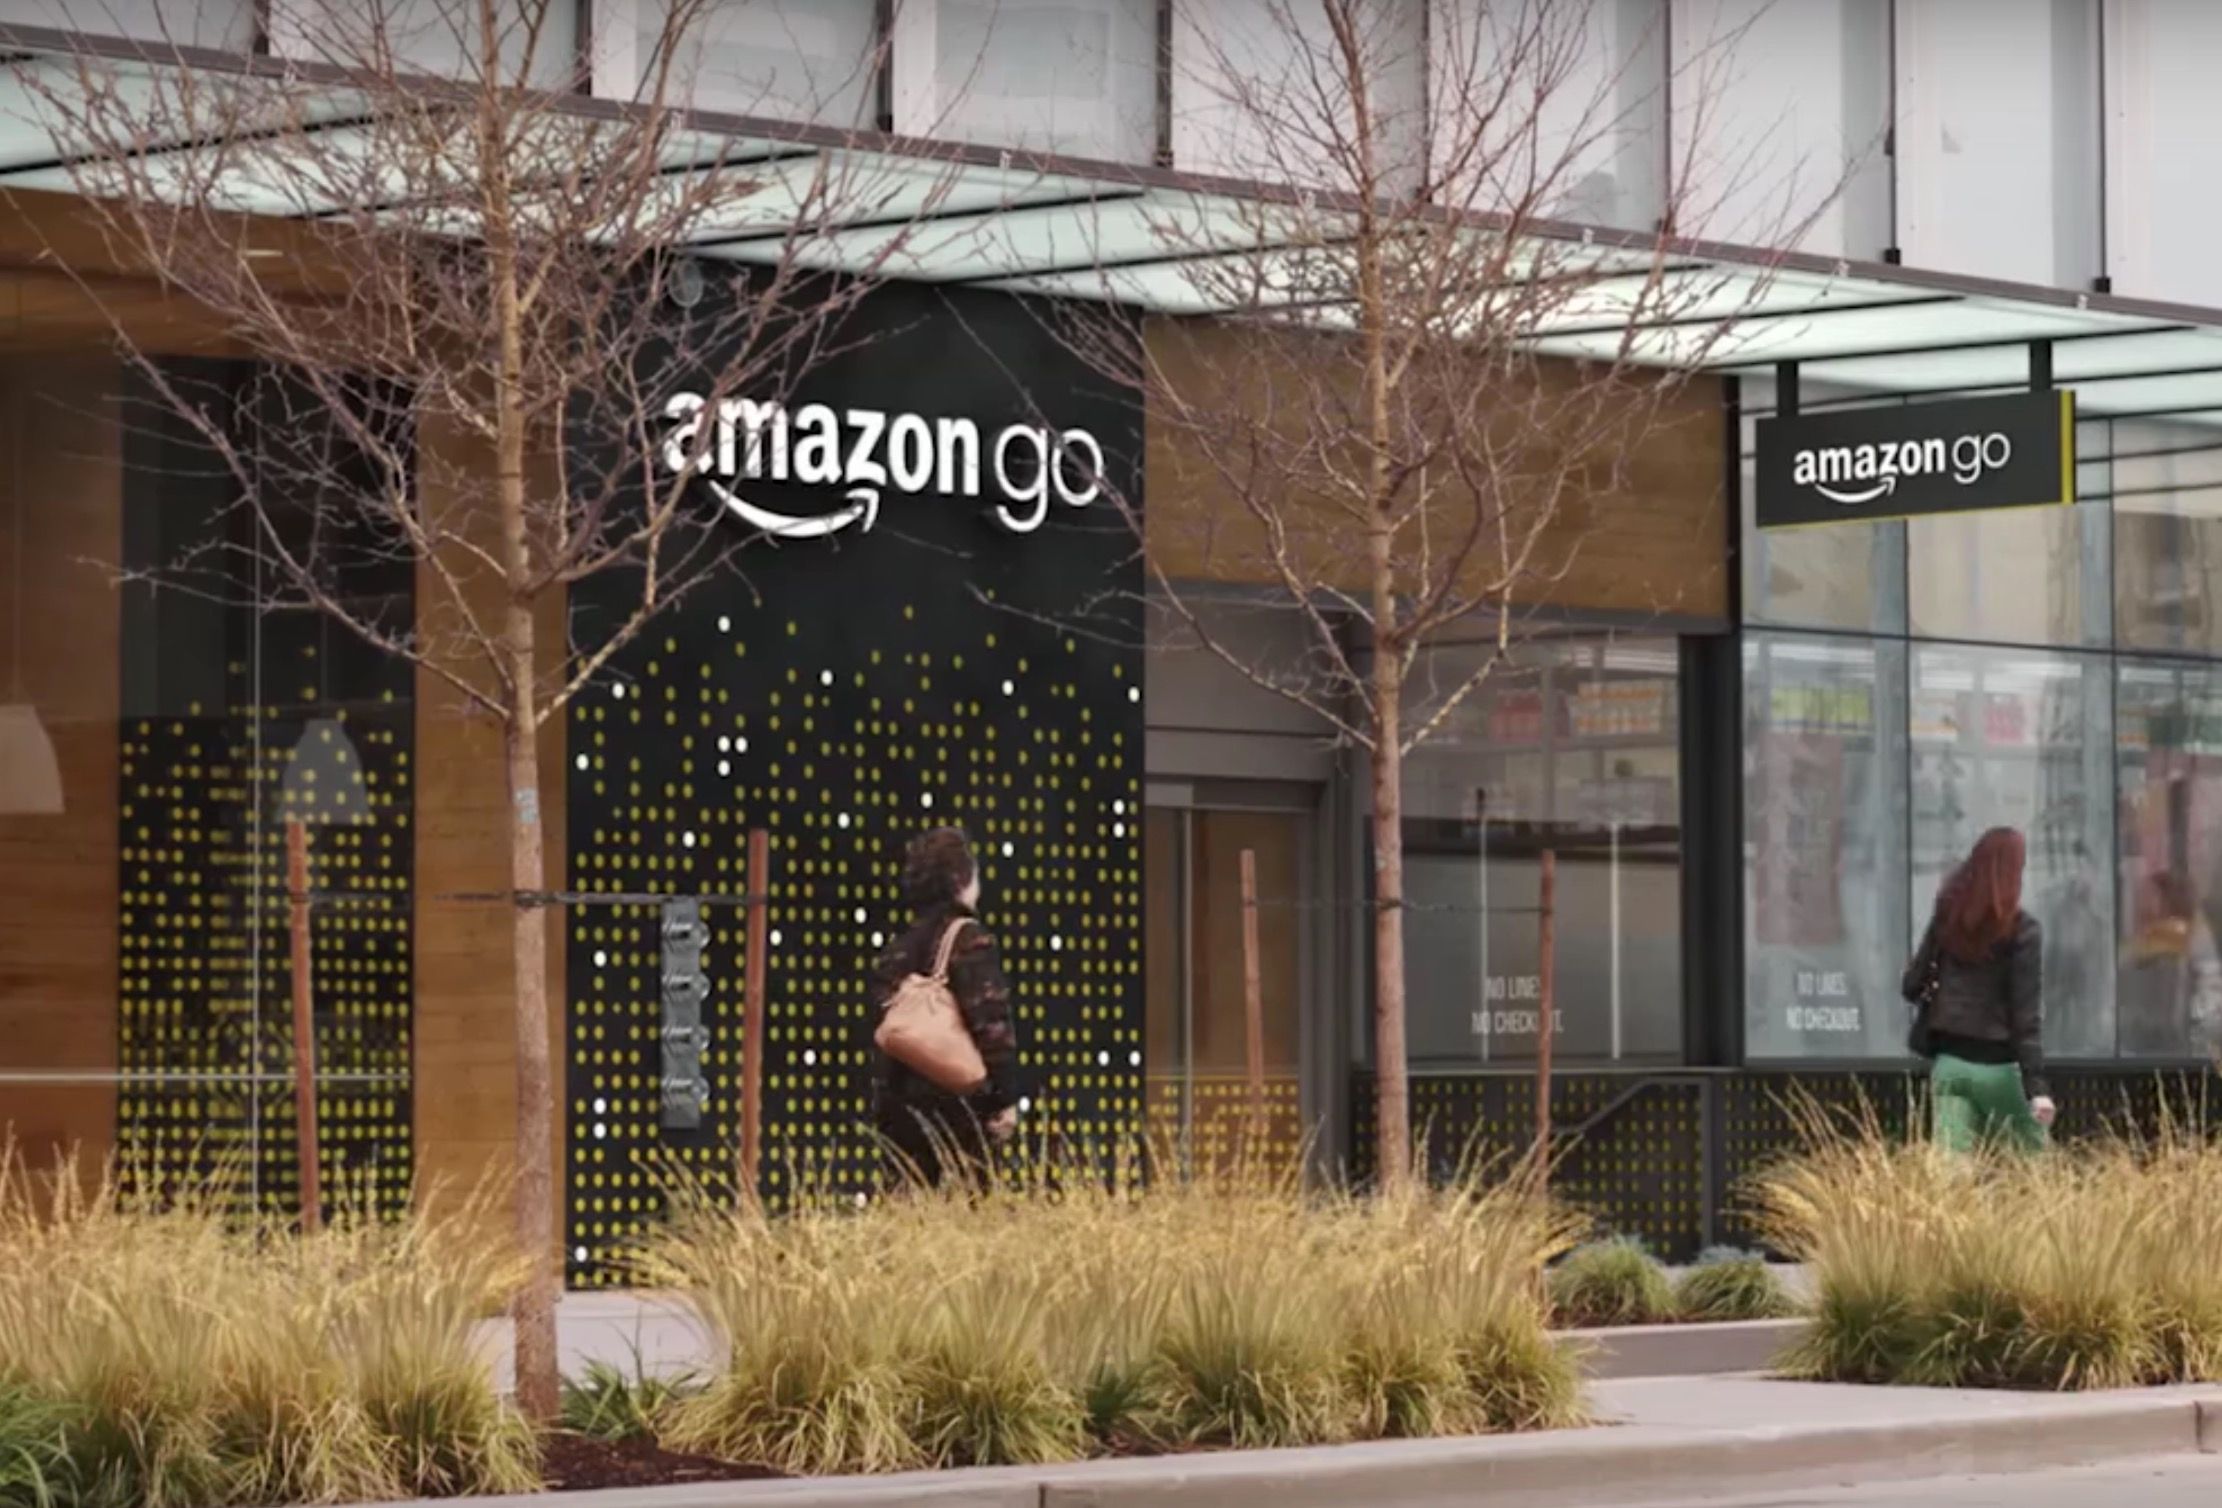 Amazon Go will soon accept cash following discrimination and elitism concerns image 1